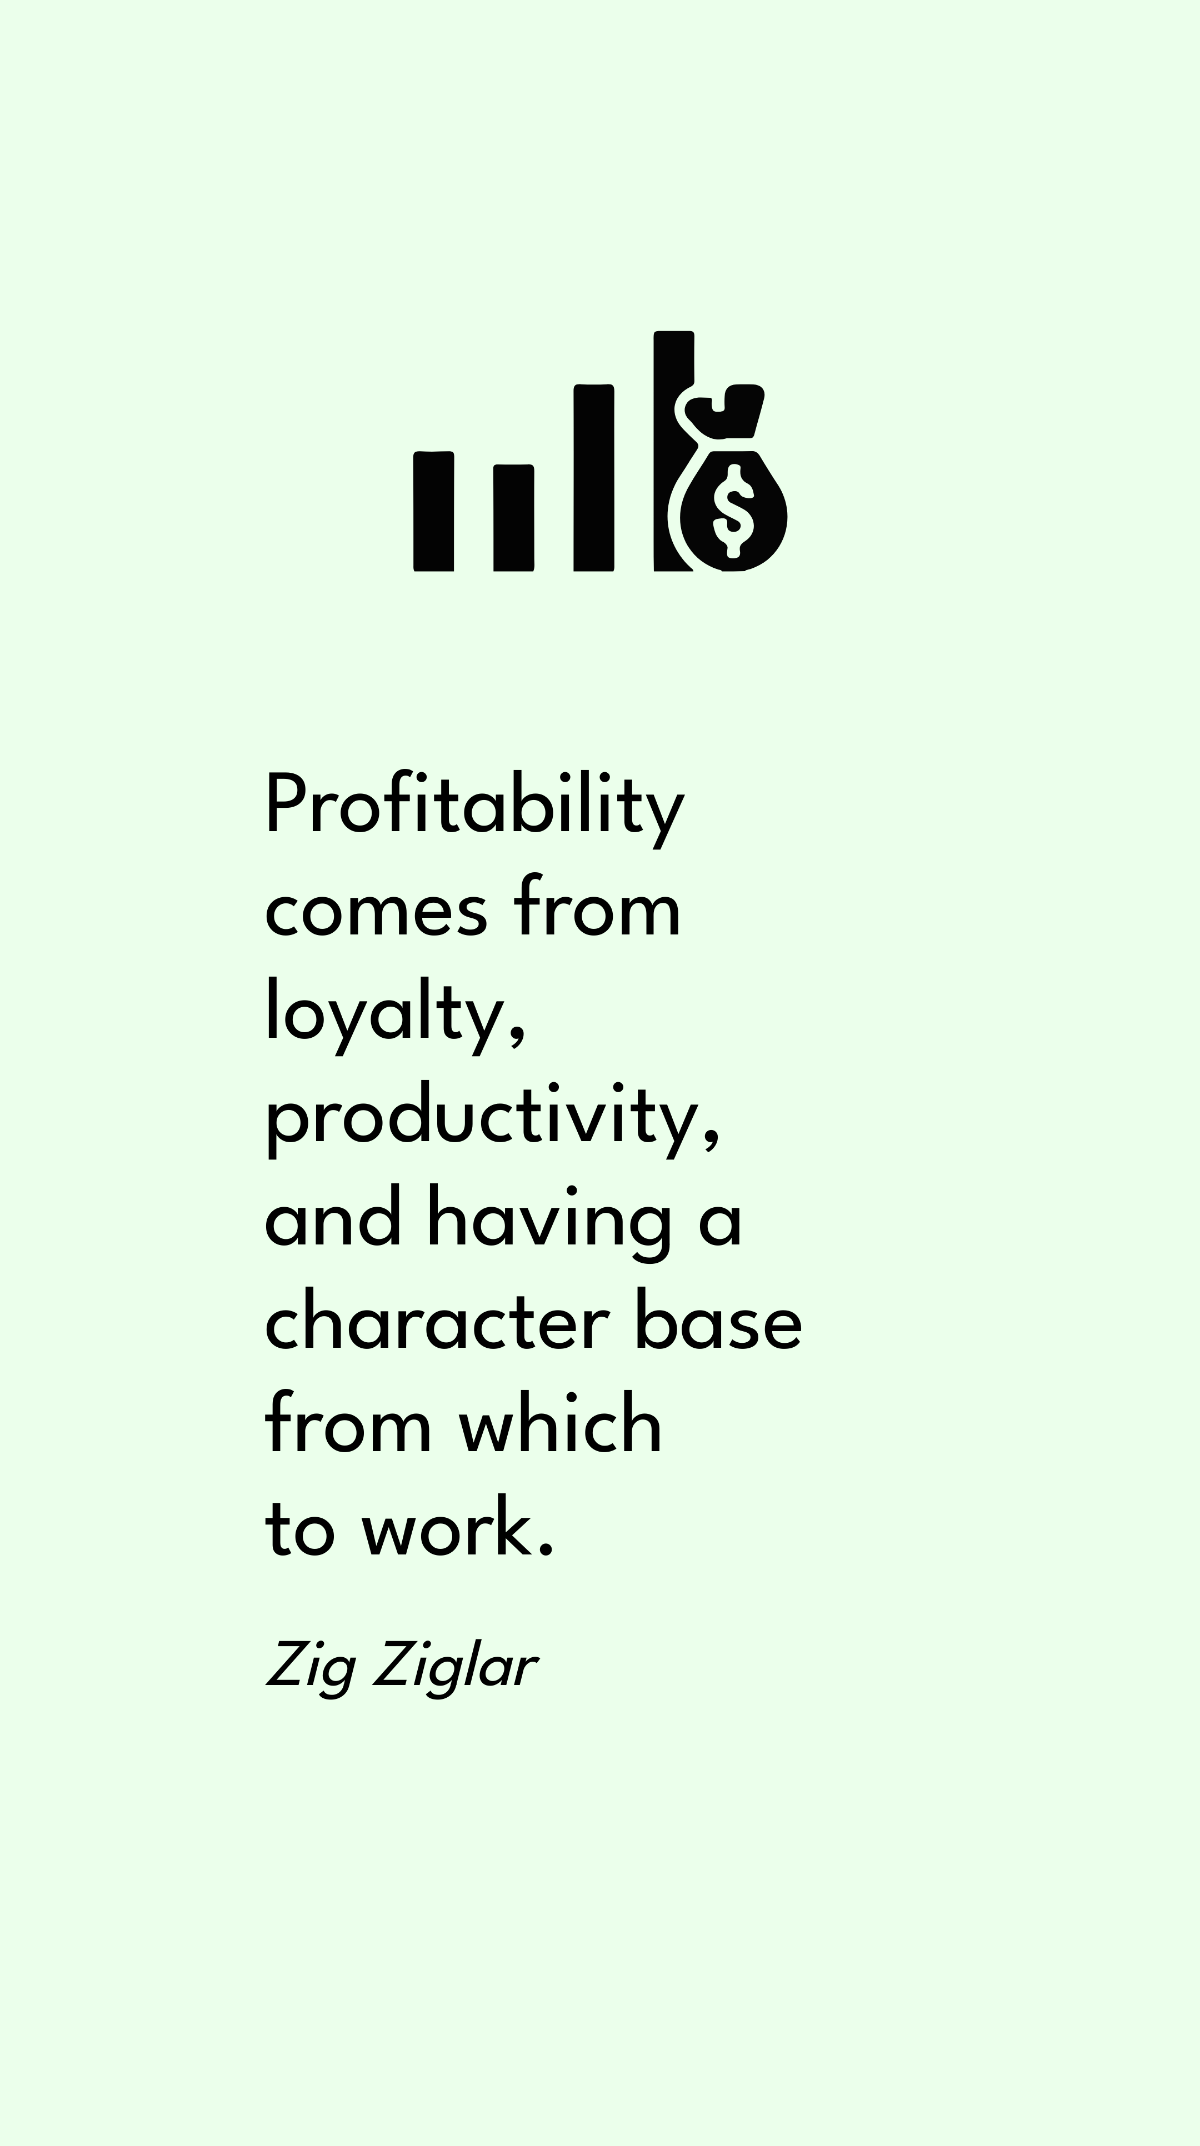 Zig Ziglar - Profitability comes from loyalty, productivity, and having a character base from which to work. Template